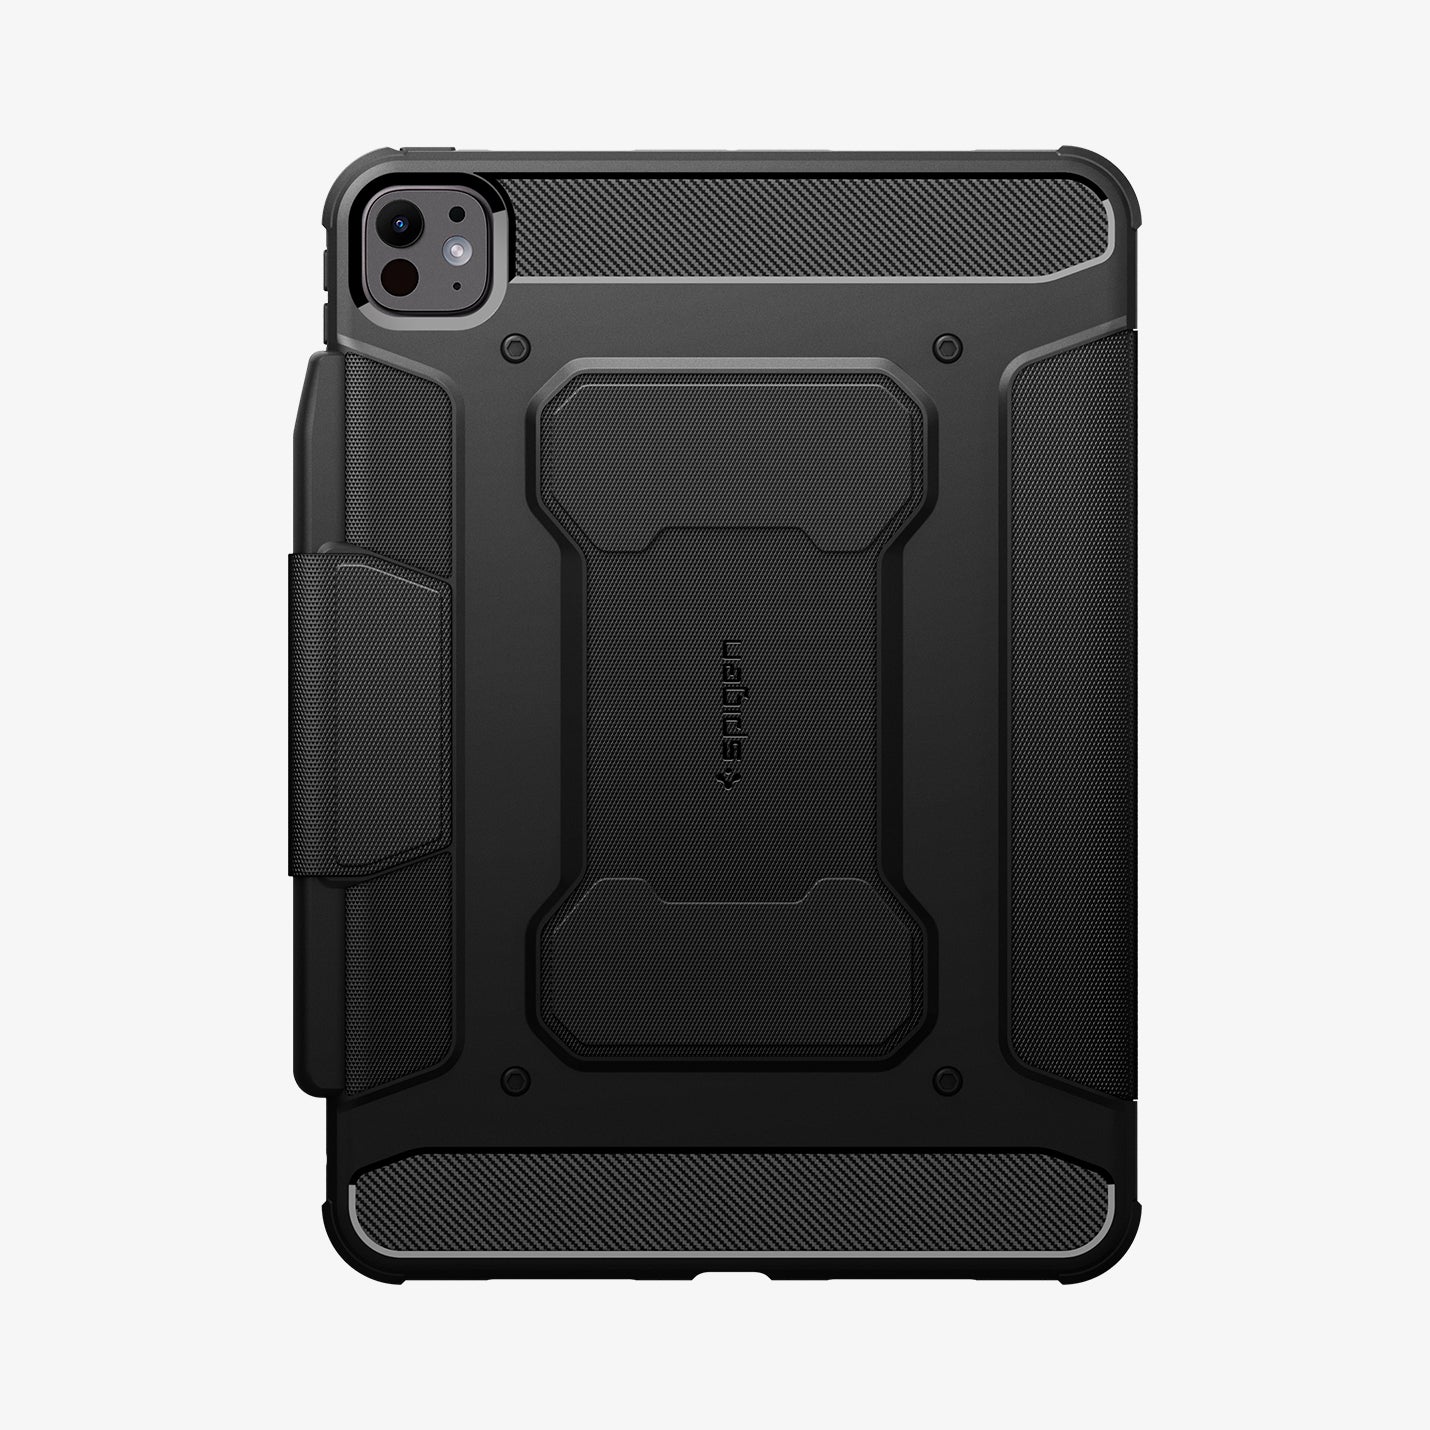 ACS07017 - iPad Pro 11-inch Case Rugged Armor Pro in Black showing the back in portrait position